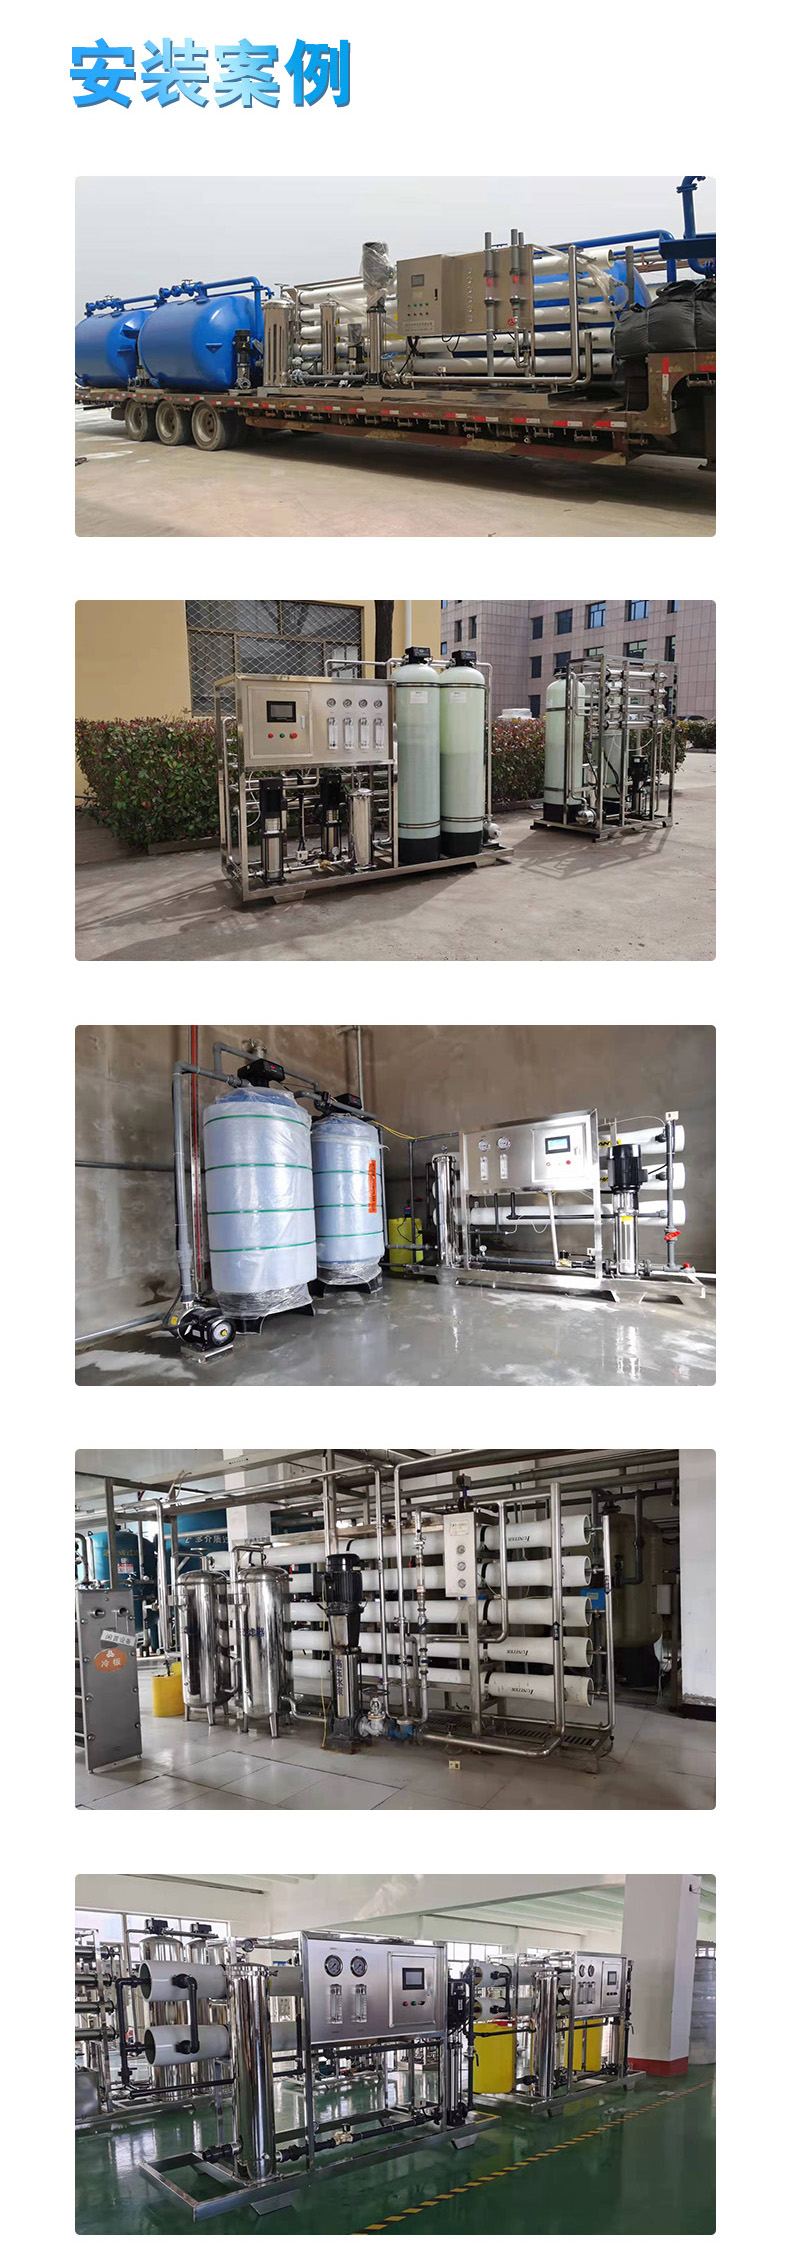 0.25 tons of purified water equipment, dedicated for water treatment, using reverse osmosis equipment for after-sales worry free direct drinking water